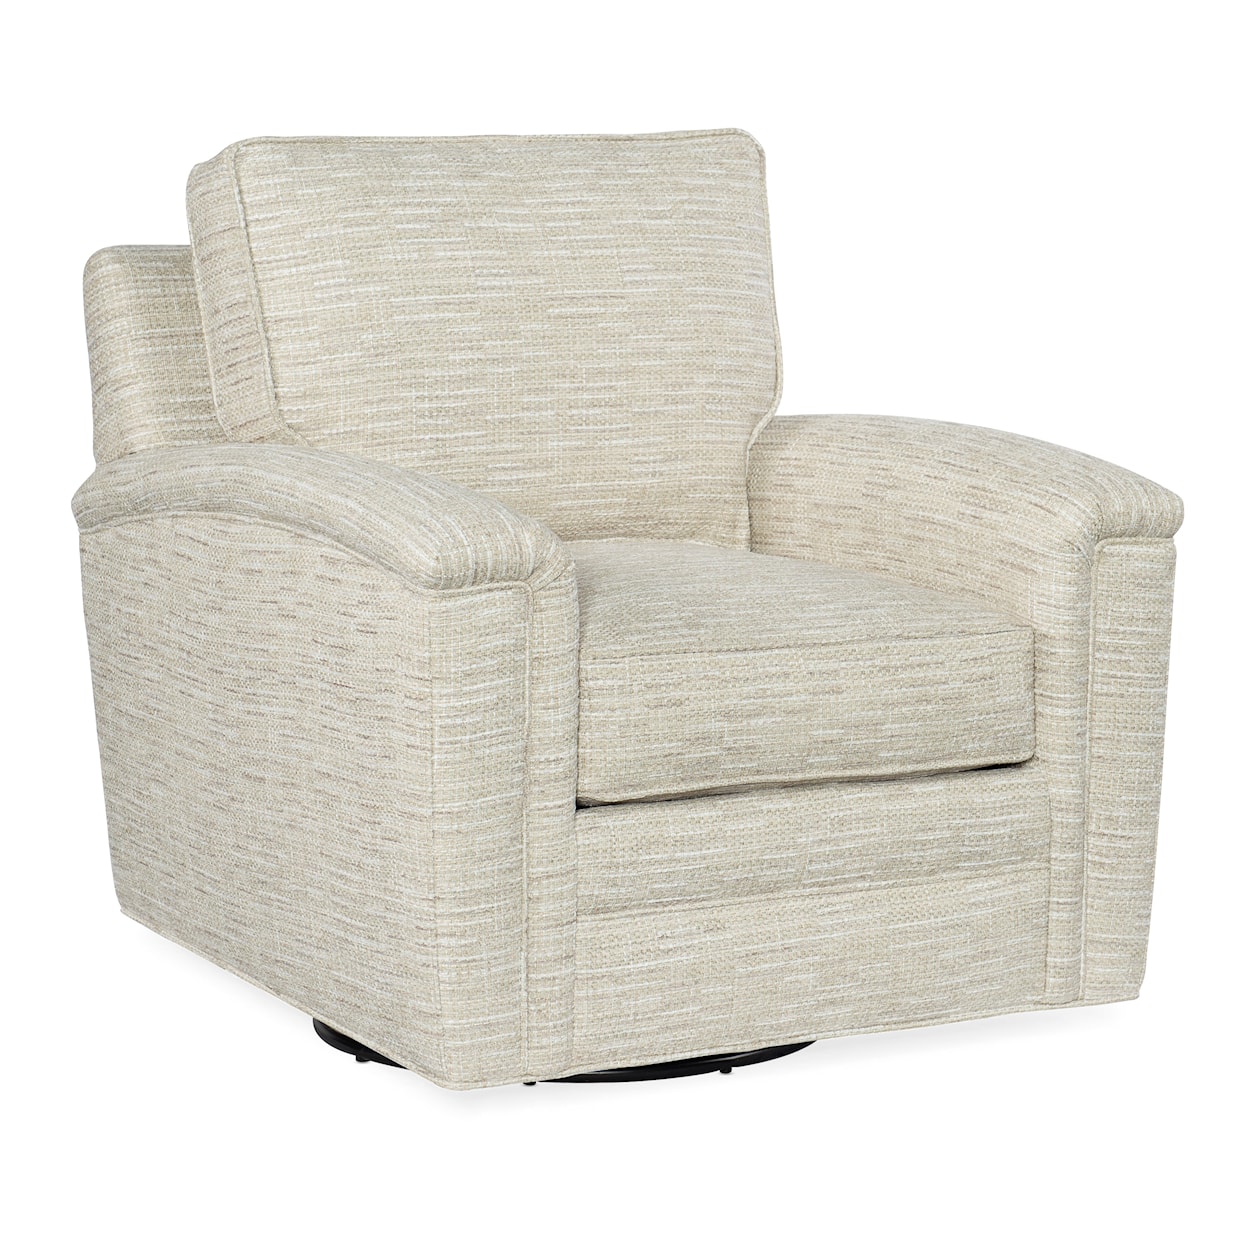 Bradington Young Oliver Oliver Swivel Chair 8-Way Tie